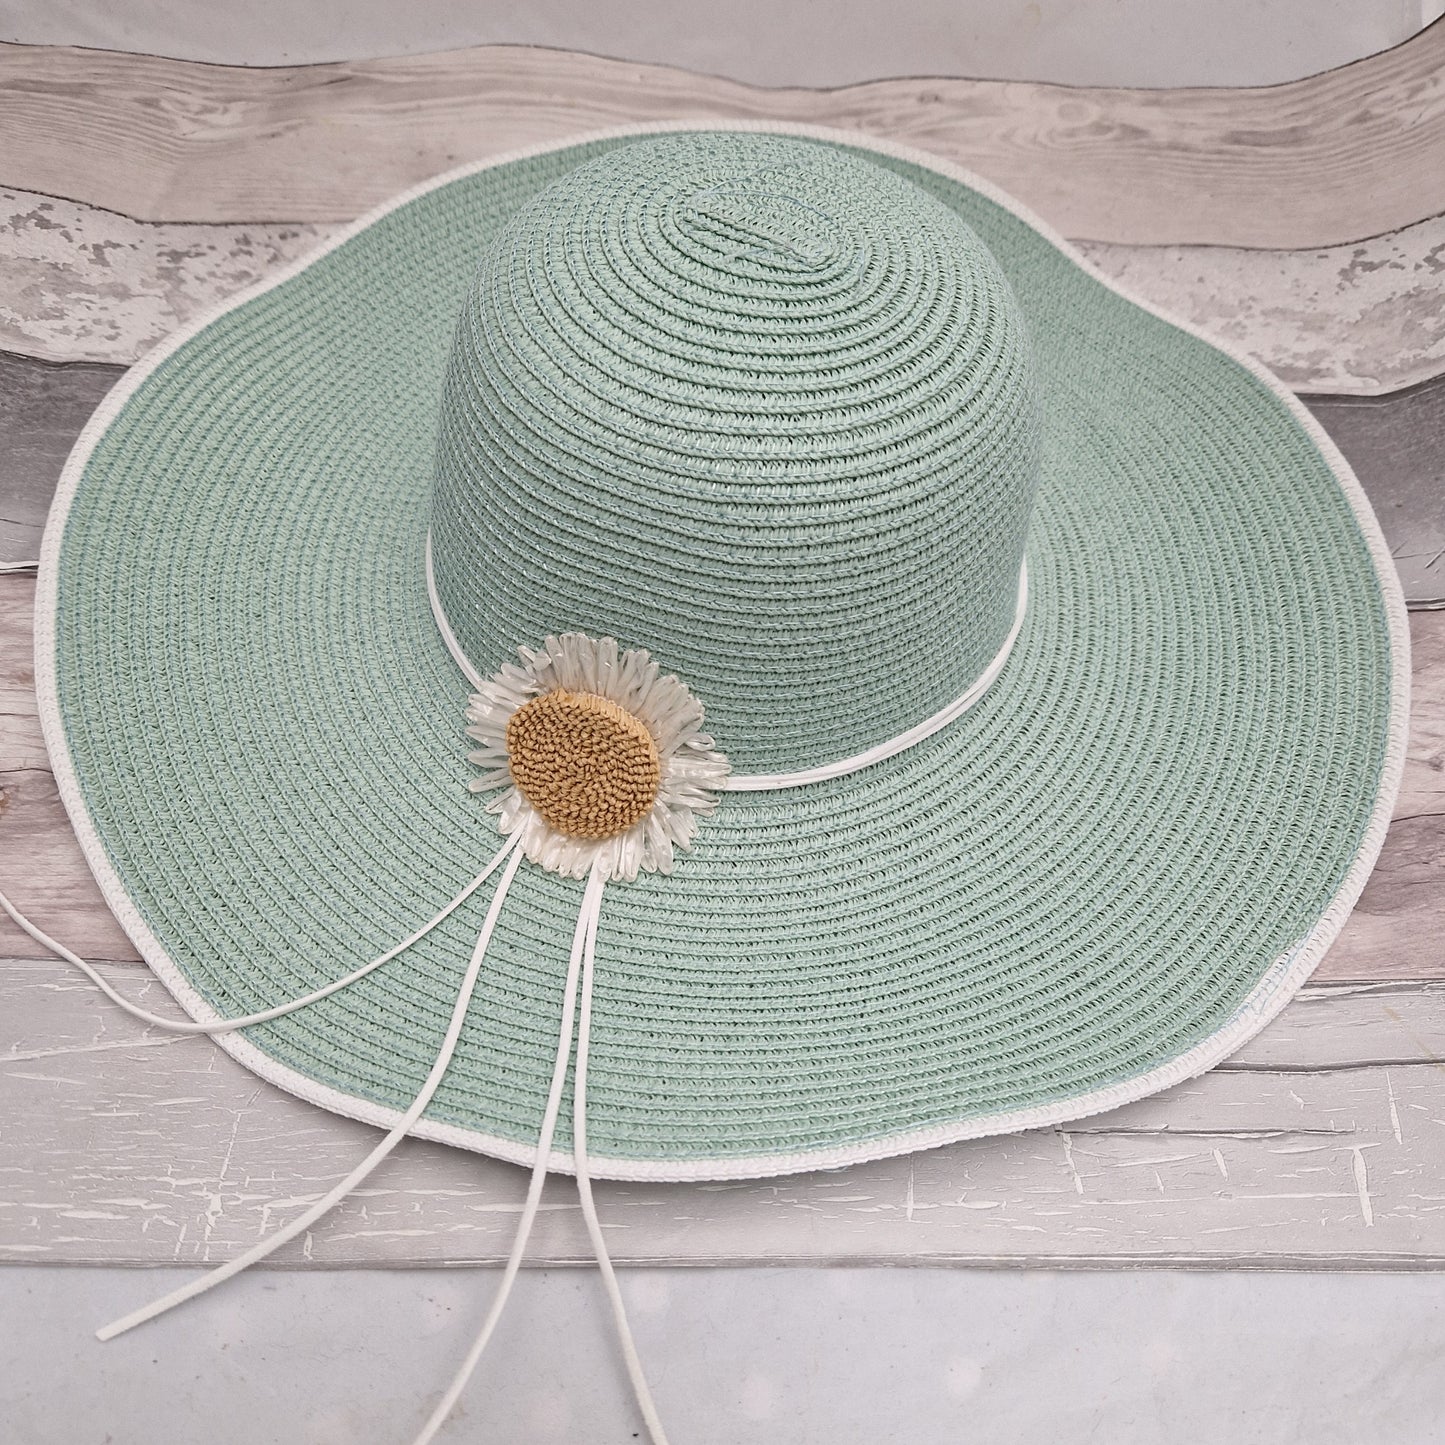 Wide brimmed mint green hat decorated with a daisy flower.